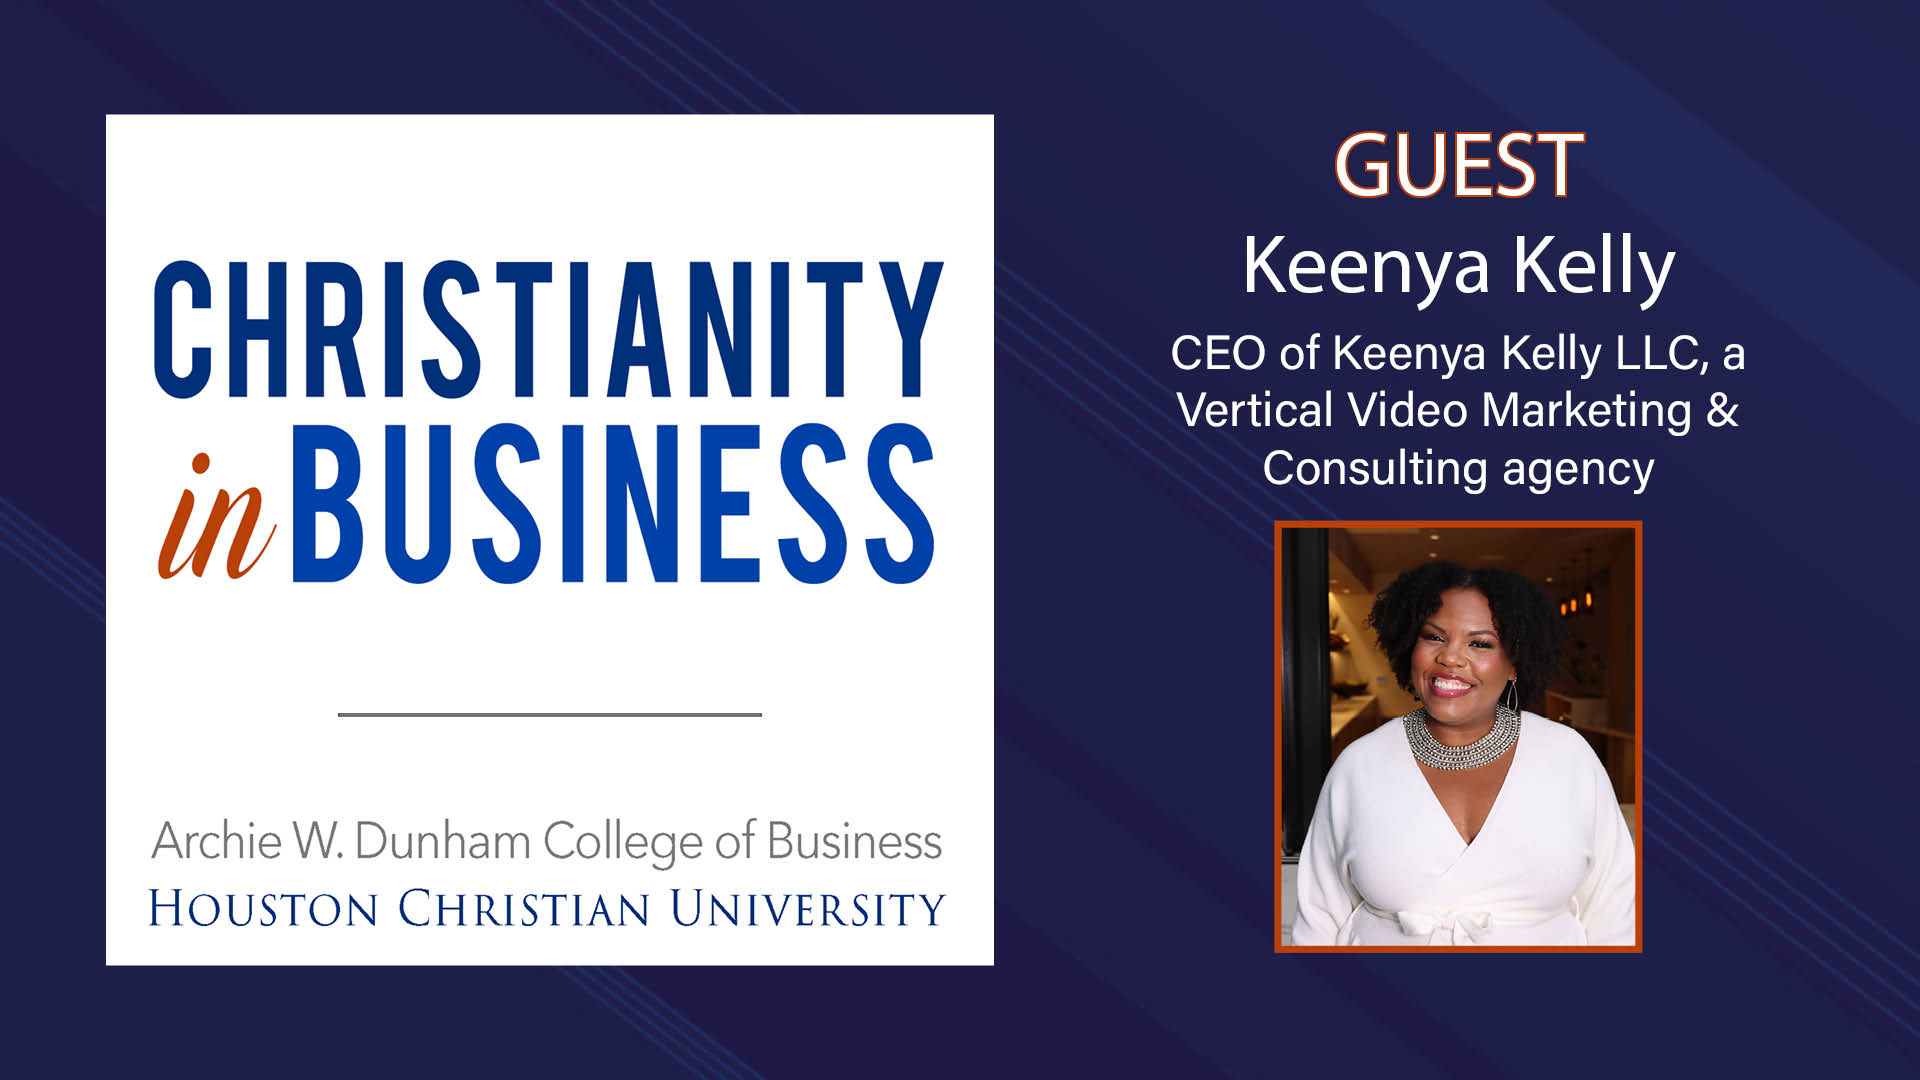 Keenya is the CEO of Keenya Kelly LLC, a Vertical Video Marketing & Consulting agency in San Diego, CA